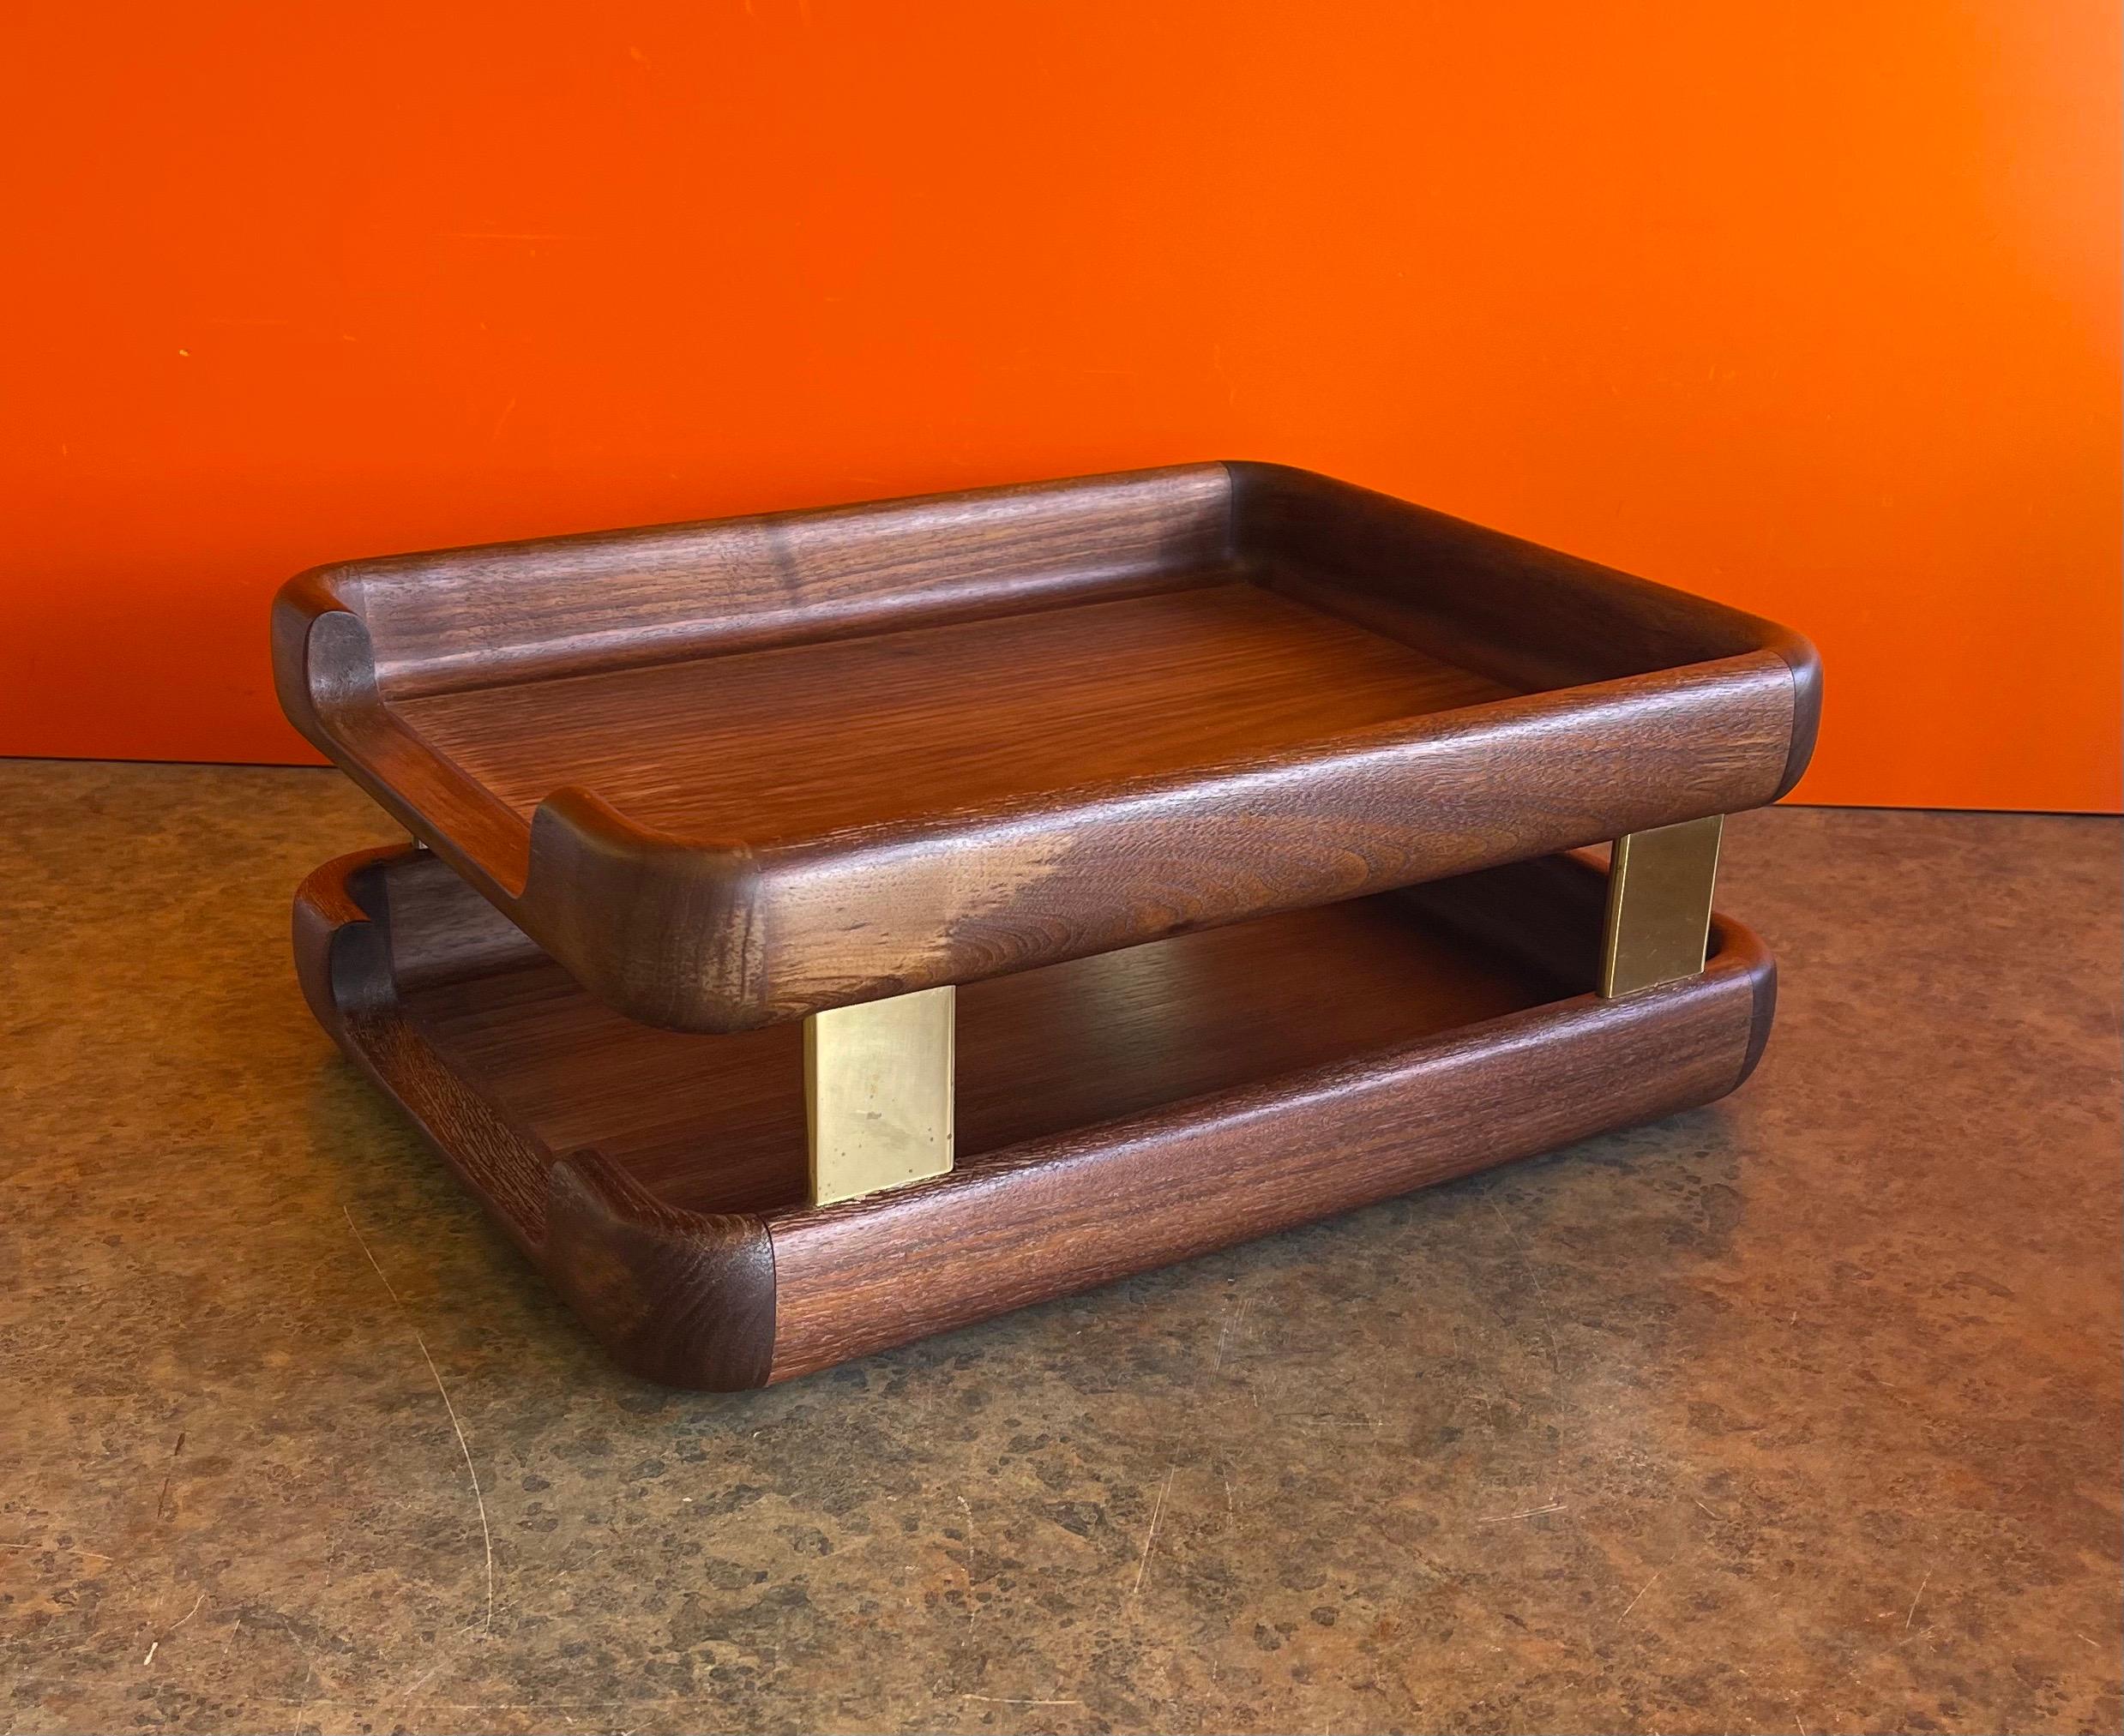 A very nice Woodline 6500 double letter desk tray in walnut and brass, circa 1980s. The desk organizer is in very good vintage condition and measures 11.5